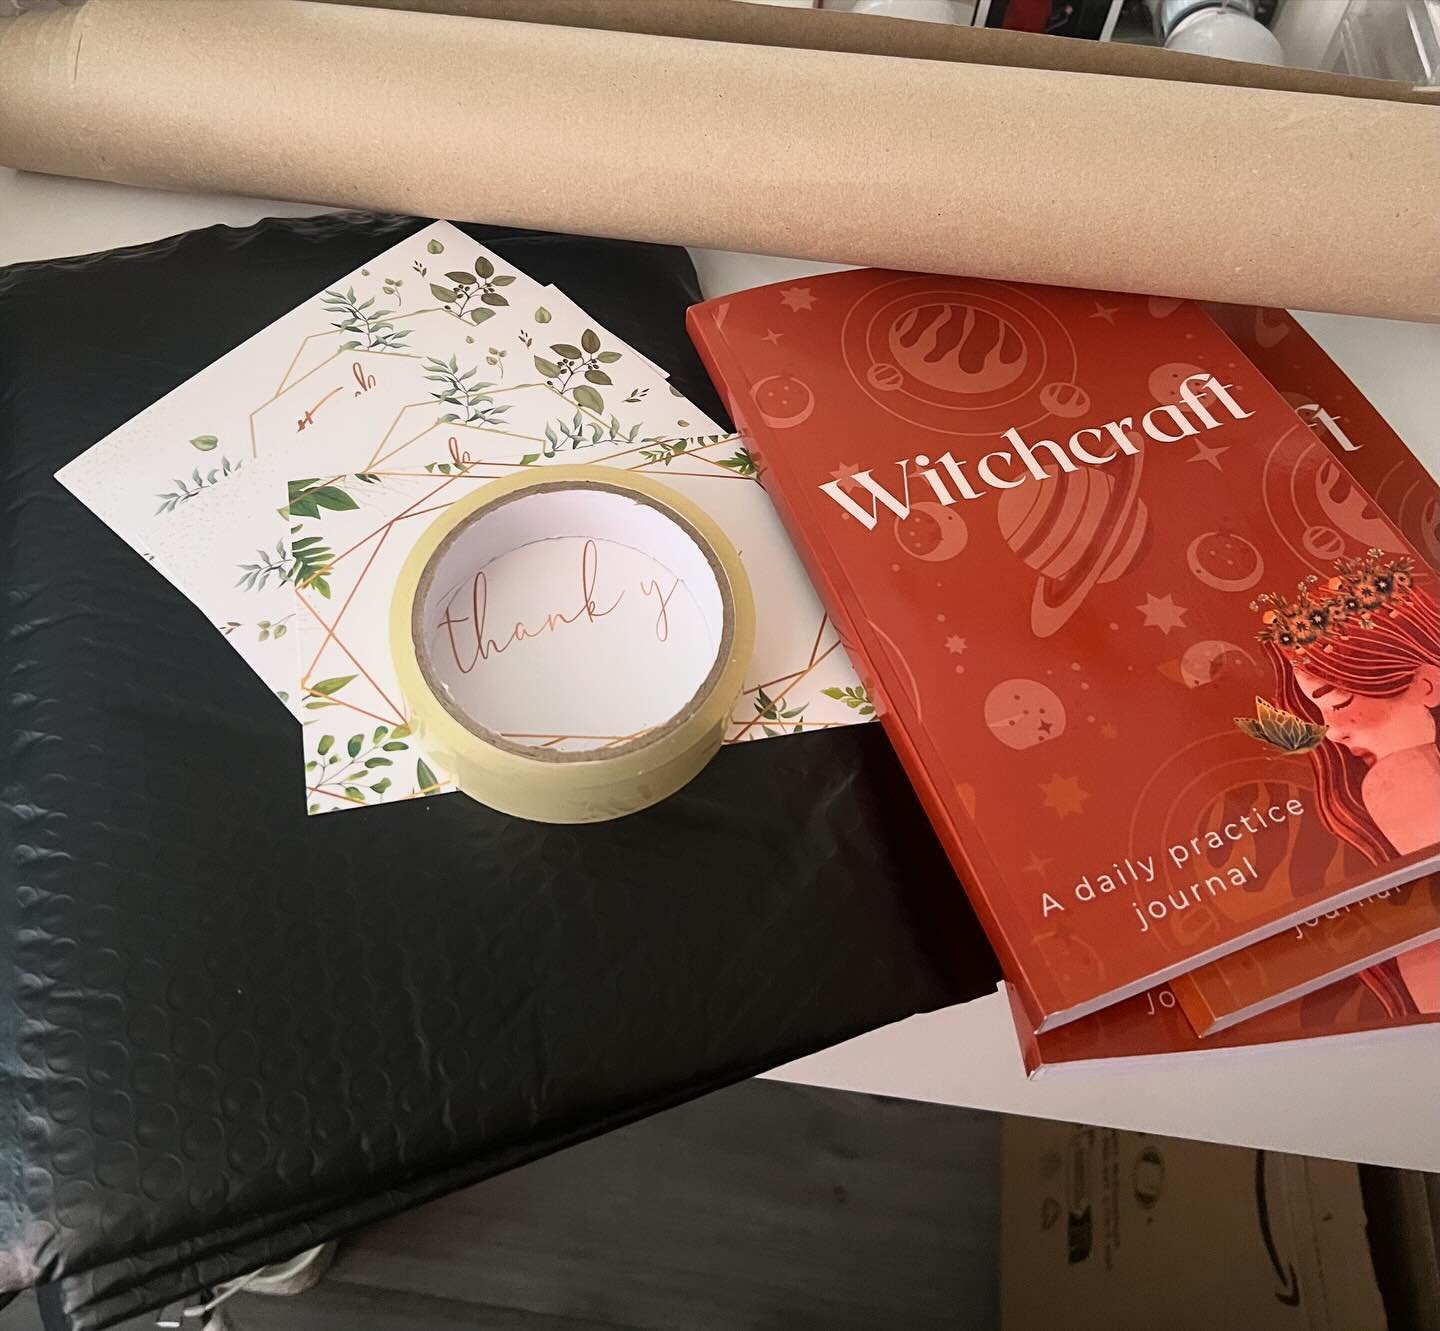 Website orders packed and ready to go. #witchcraftbook #pagansofinstagram #paganwitch #wiccan #witchesoninstagram